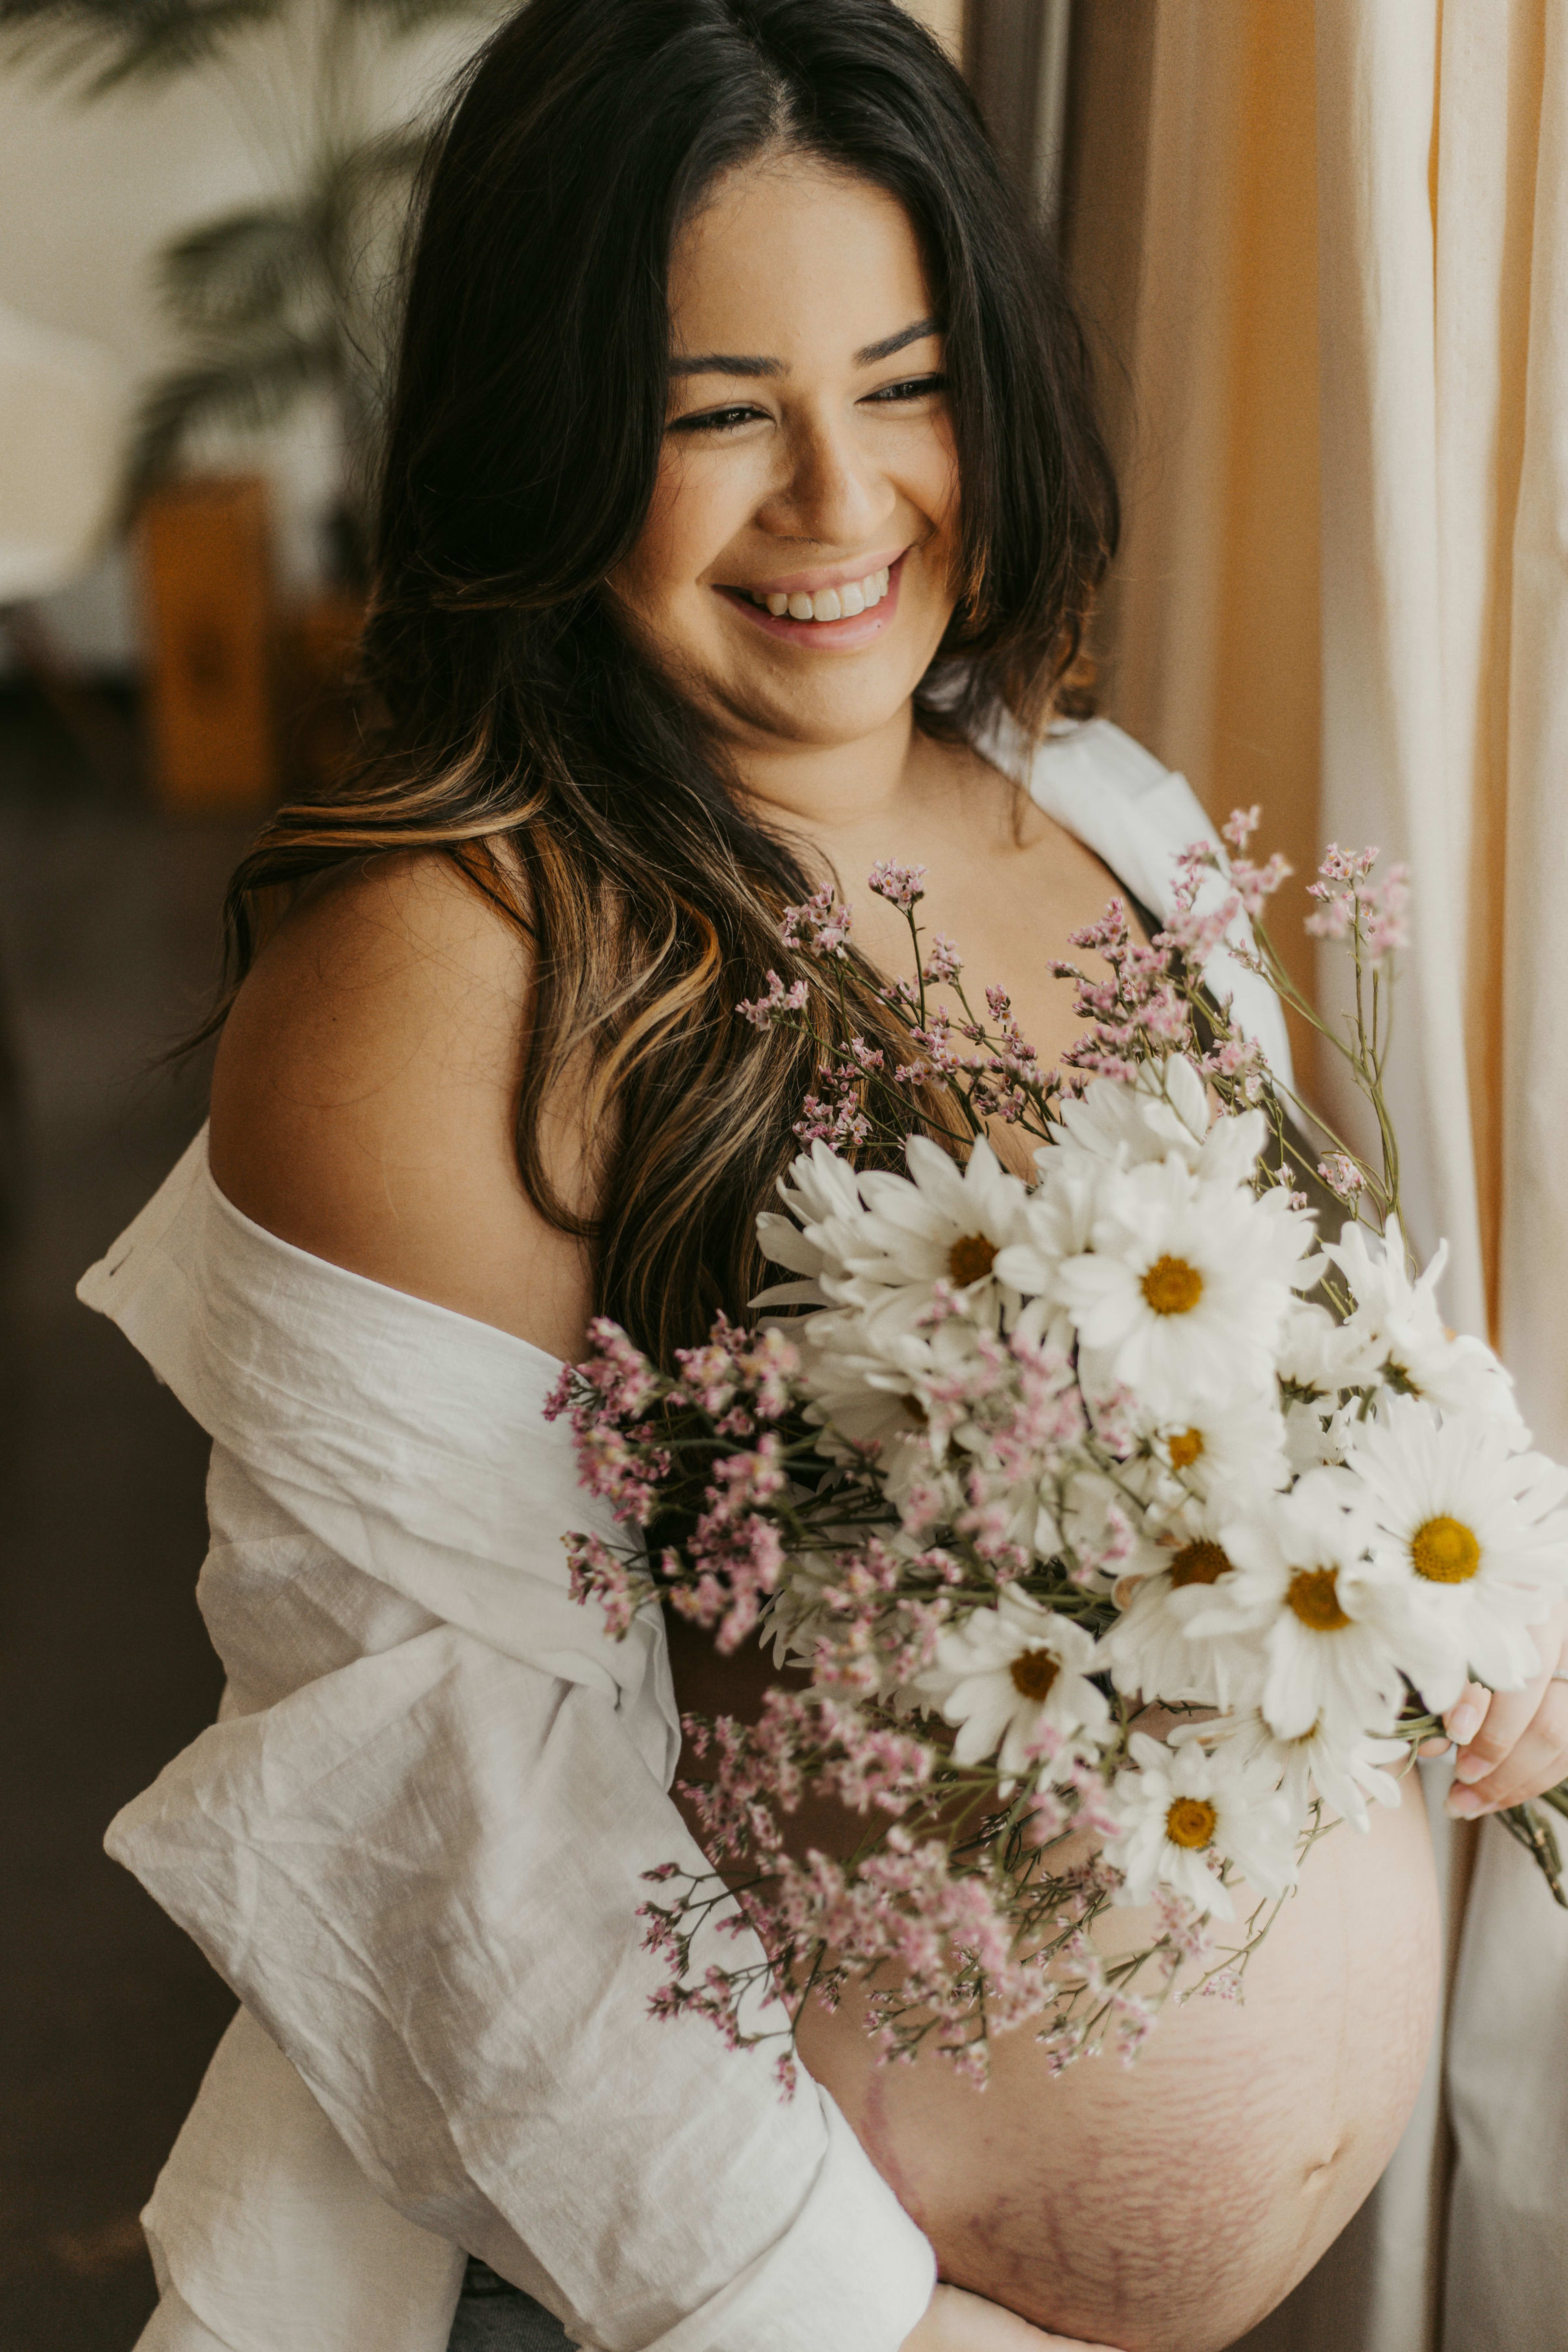 A white maternity photoshoot featuring a pregnant woman holding a bouquet of flowers.